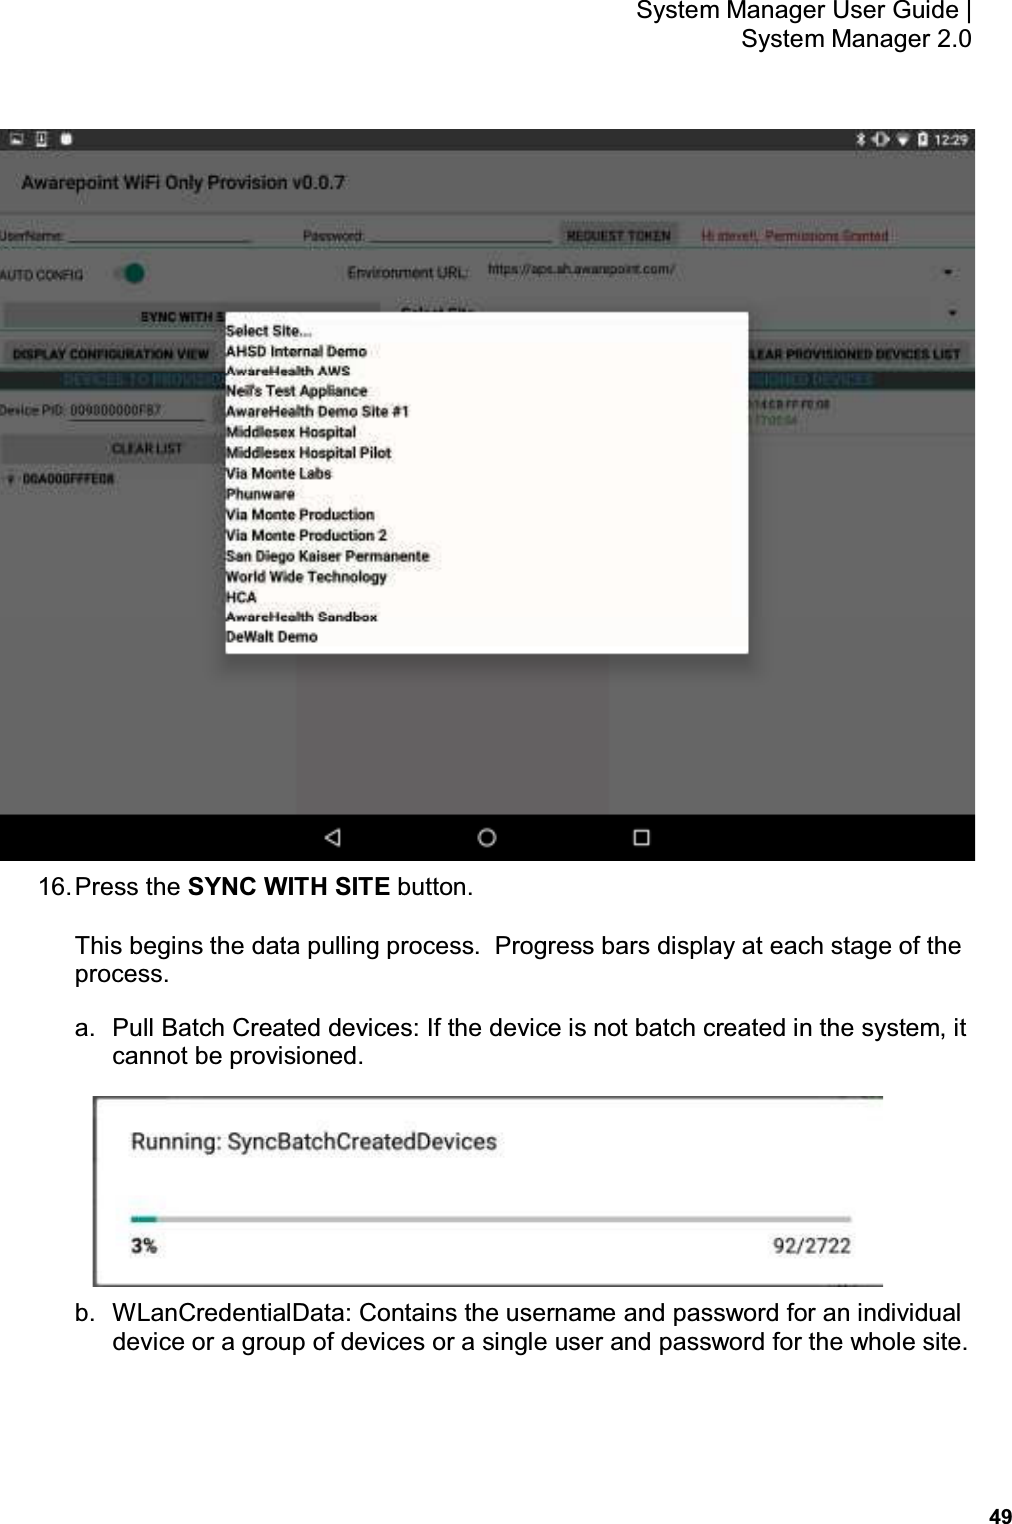           49 System Manager User Guide |  System Manager 2.0  16. Press the SYNC WITH SITE button. This begins the data pulling process.  Progress bars display at each stage of the process. a.  Pull Batch Created devices: If the device is not batch created in the system, it cannot be provisioned.  b.  WLanCredentialData: Contains the username and password for an individual device or a group of devices or a single user and password for the whole site. 